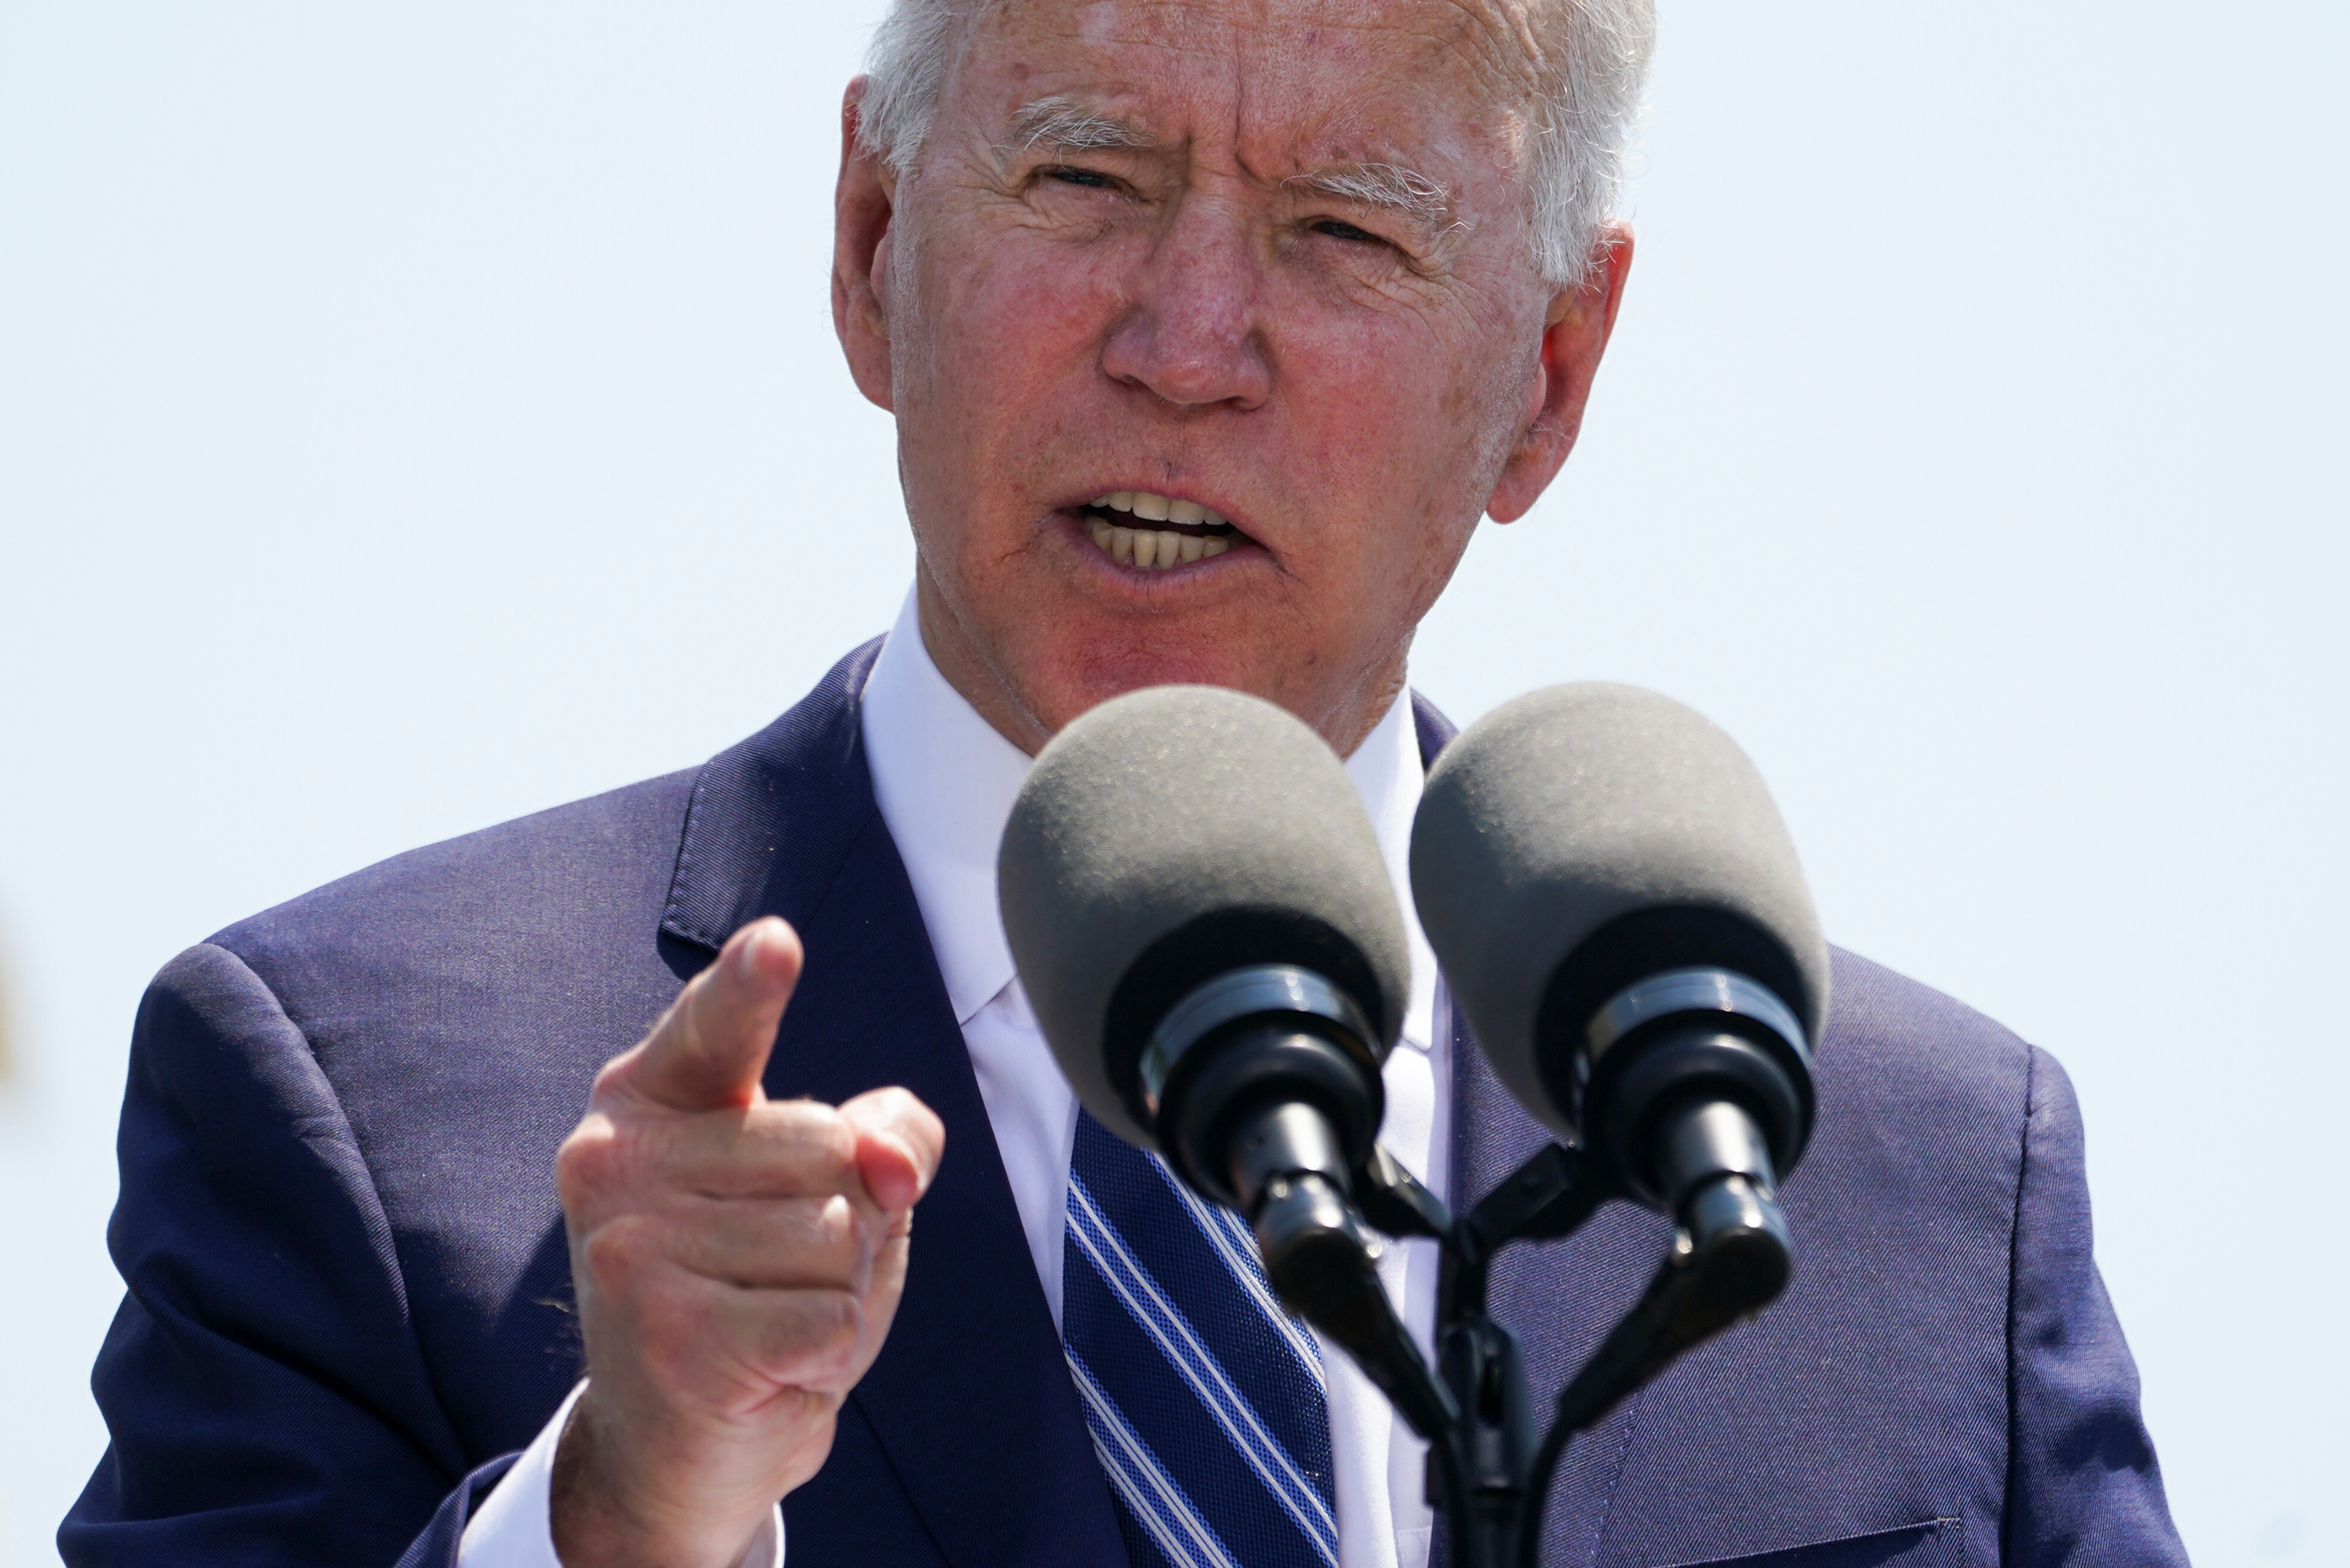 Biden to offer budget proposal on May 28 | Reuters